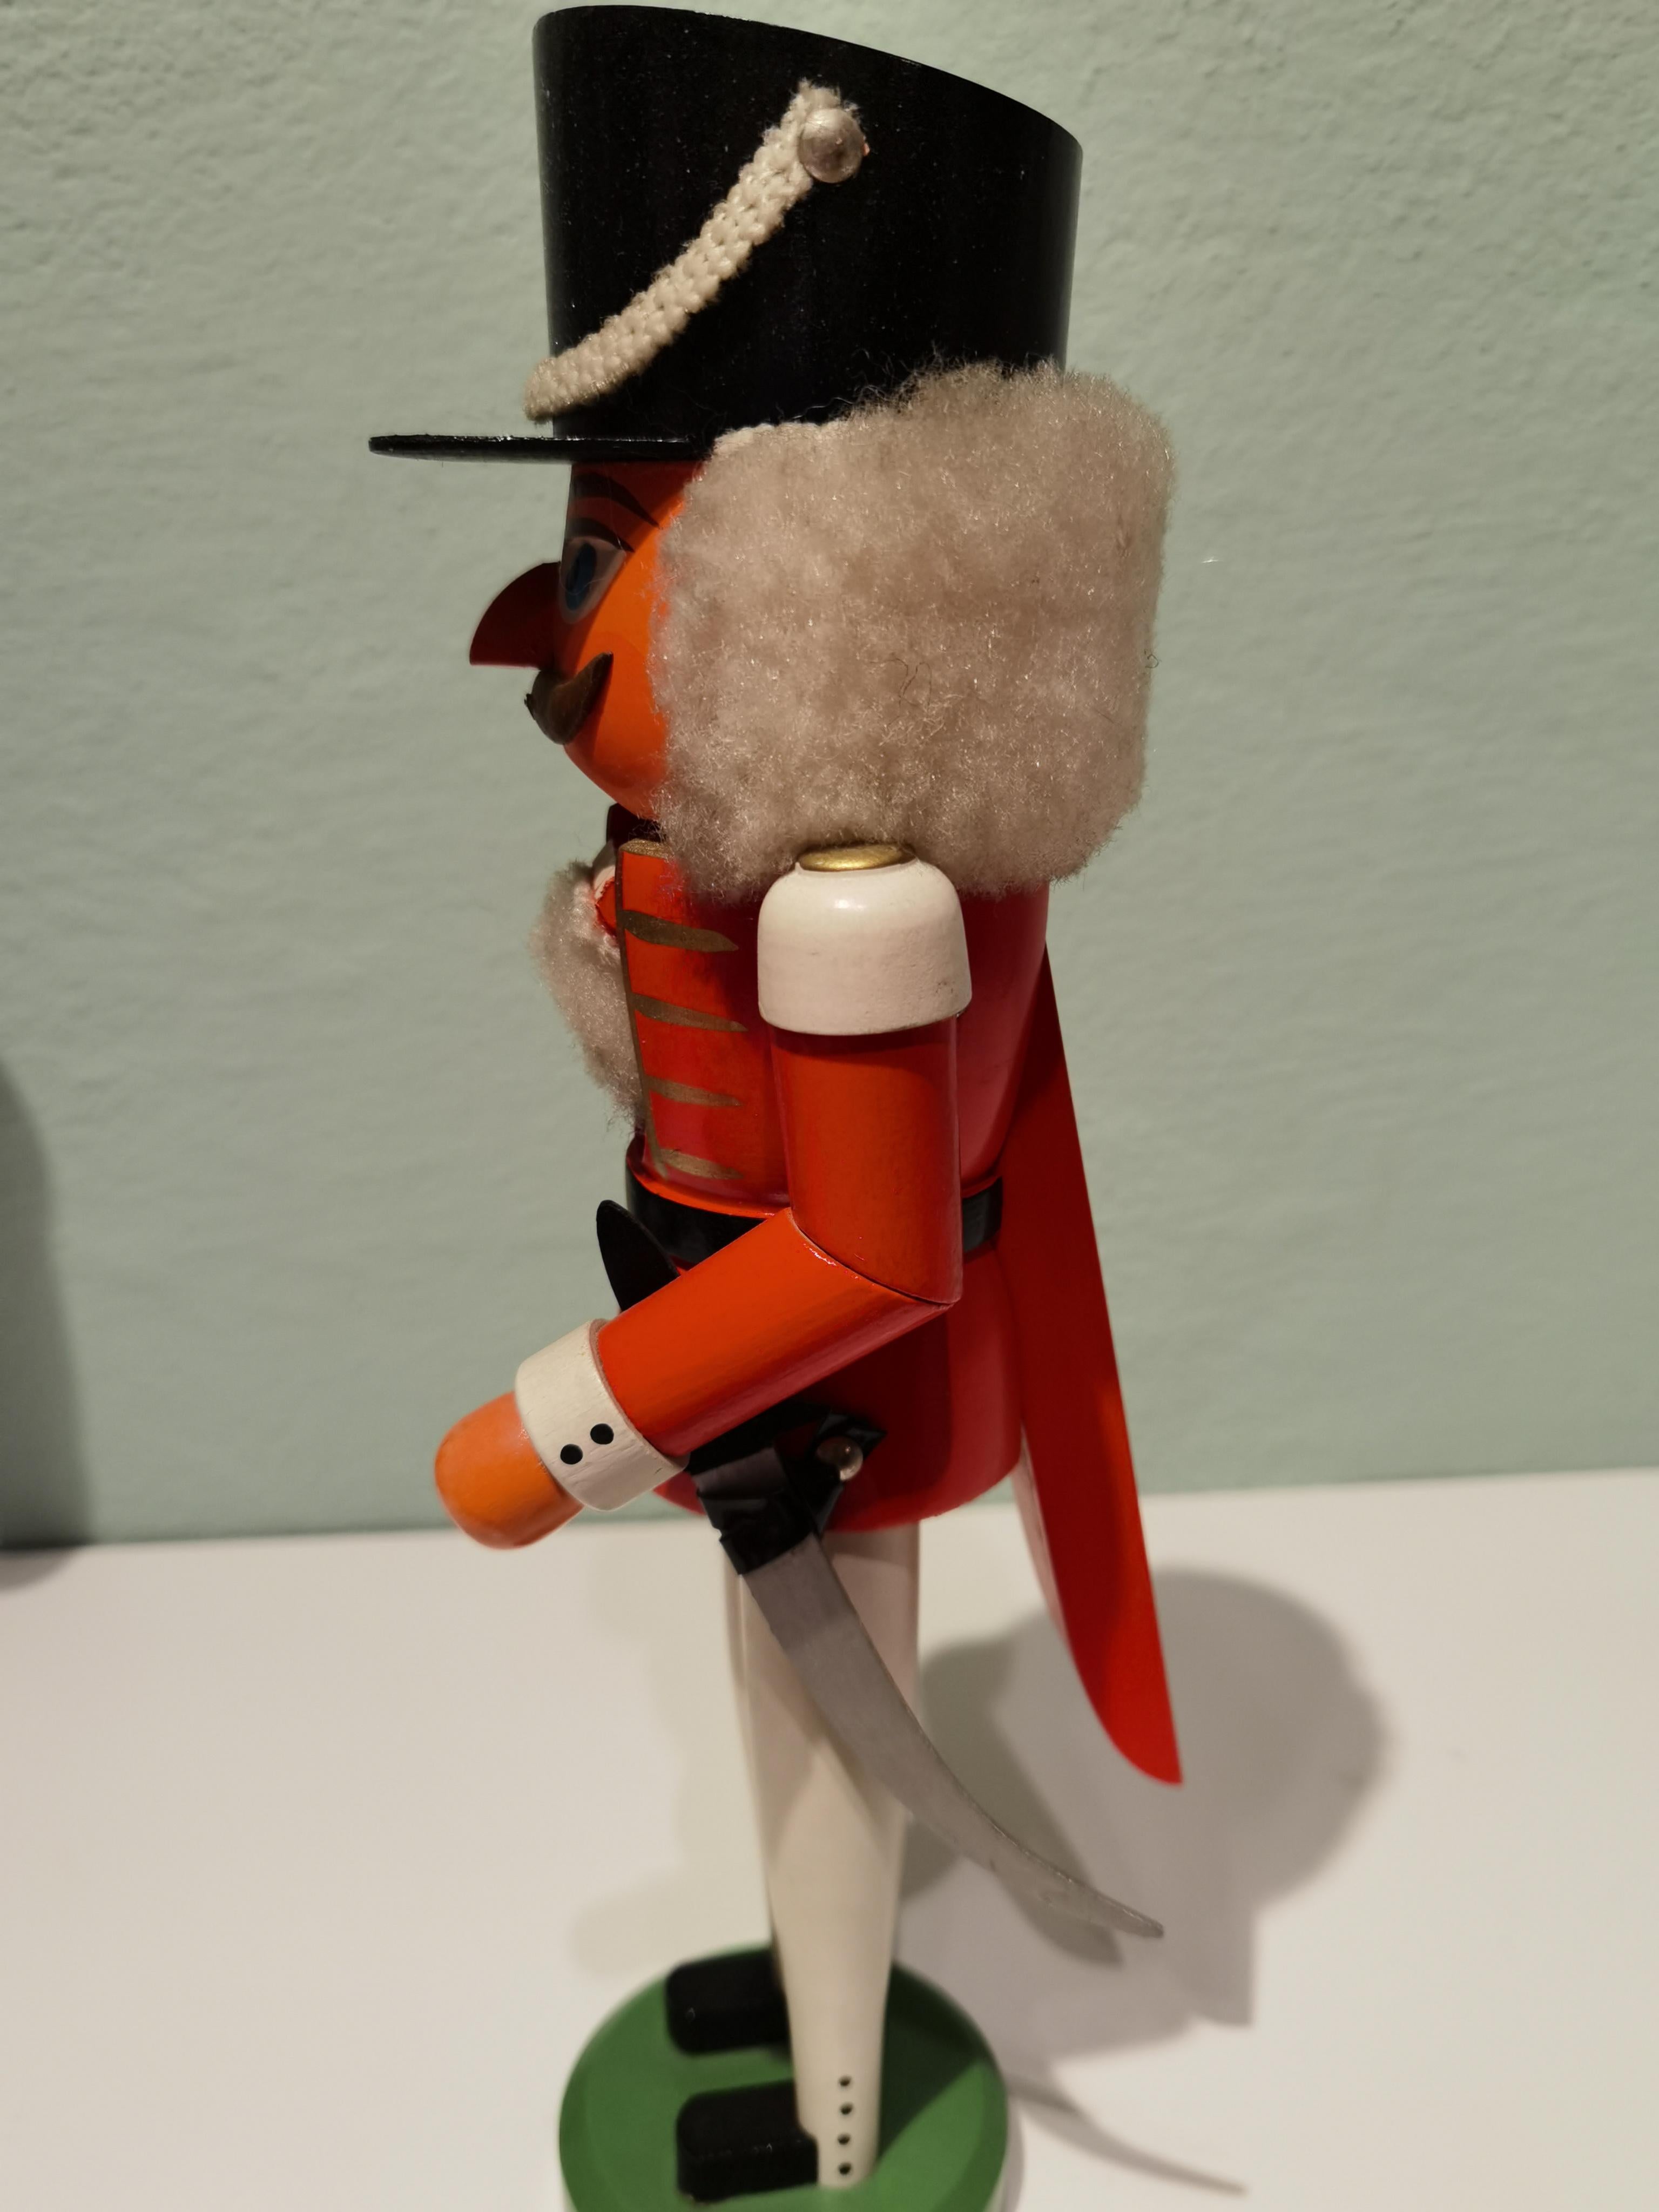 Large wooden nutcracker figure from the Erzgebirge. The region Erzgebirge formerly Eastern Germany is famous for this special kind of nutcrackers, where intricate carving has been their home. Completely hand painted in bright red and white colors